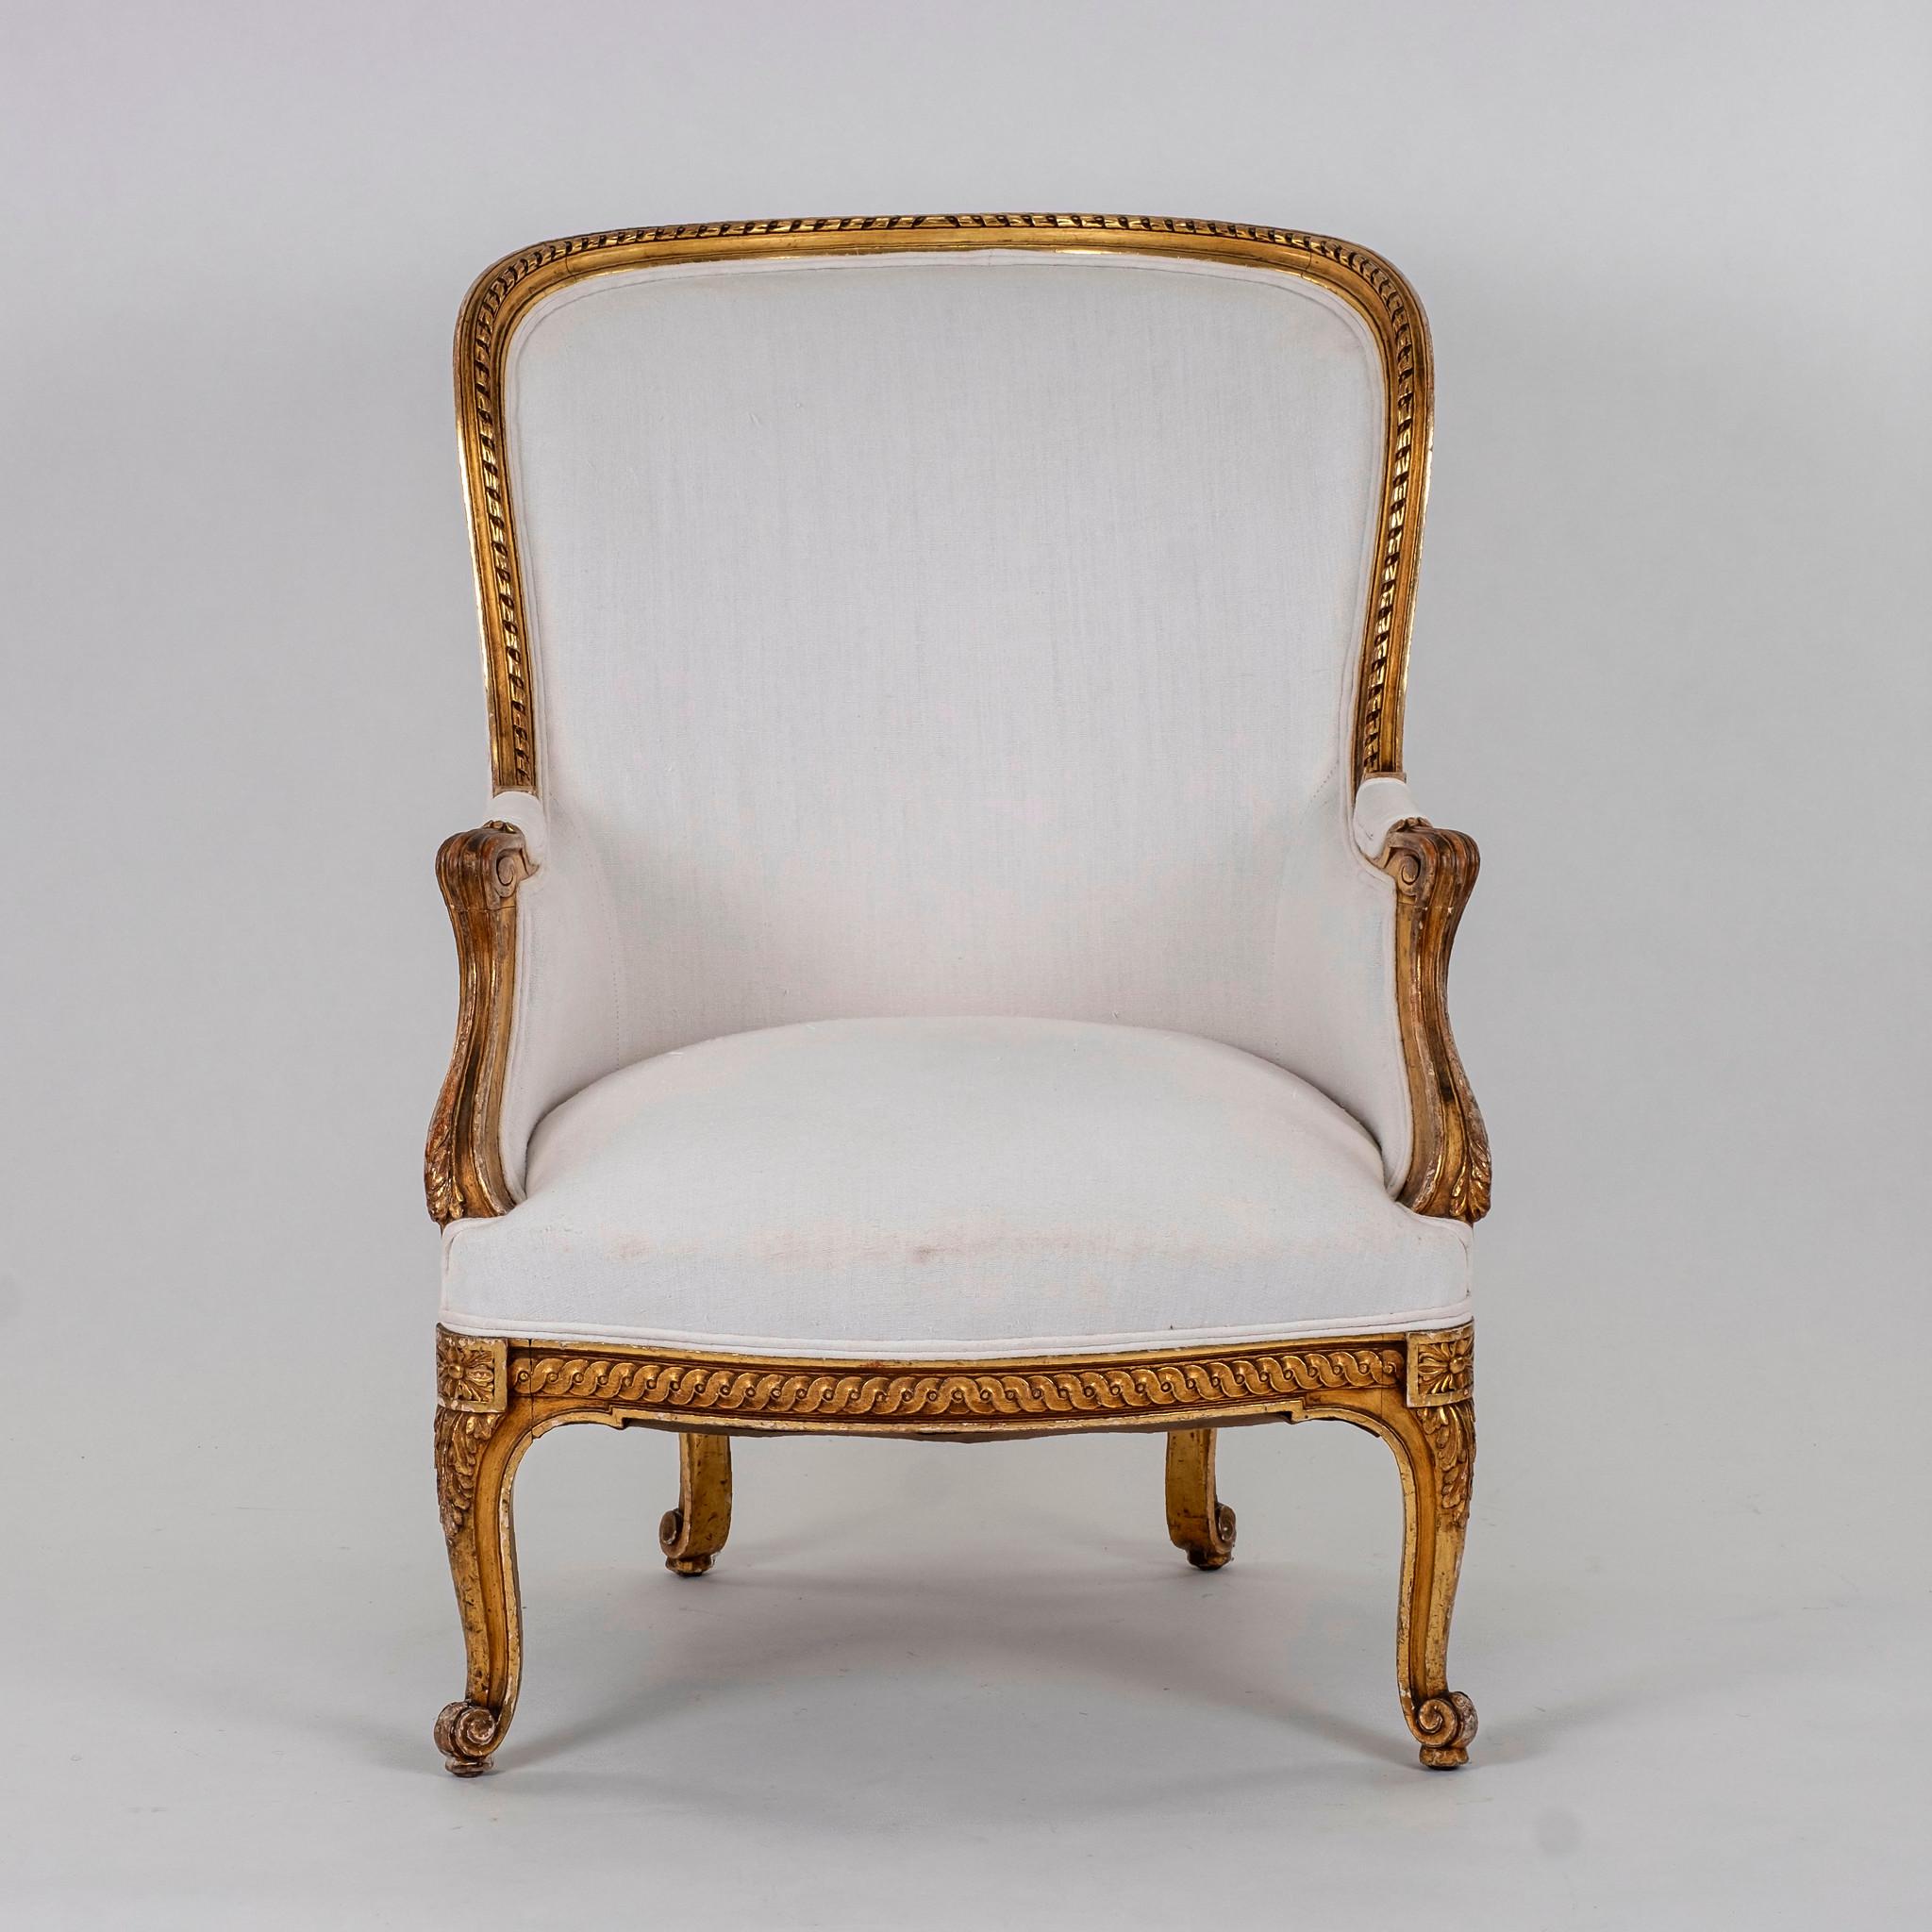 19th century giltwood bergere upholstered in white linen.